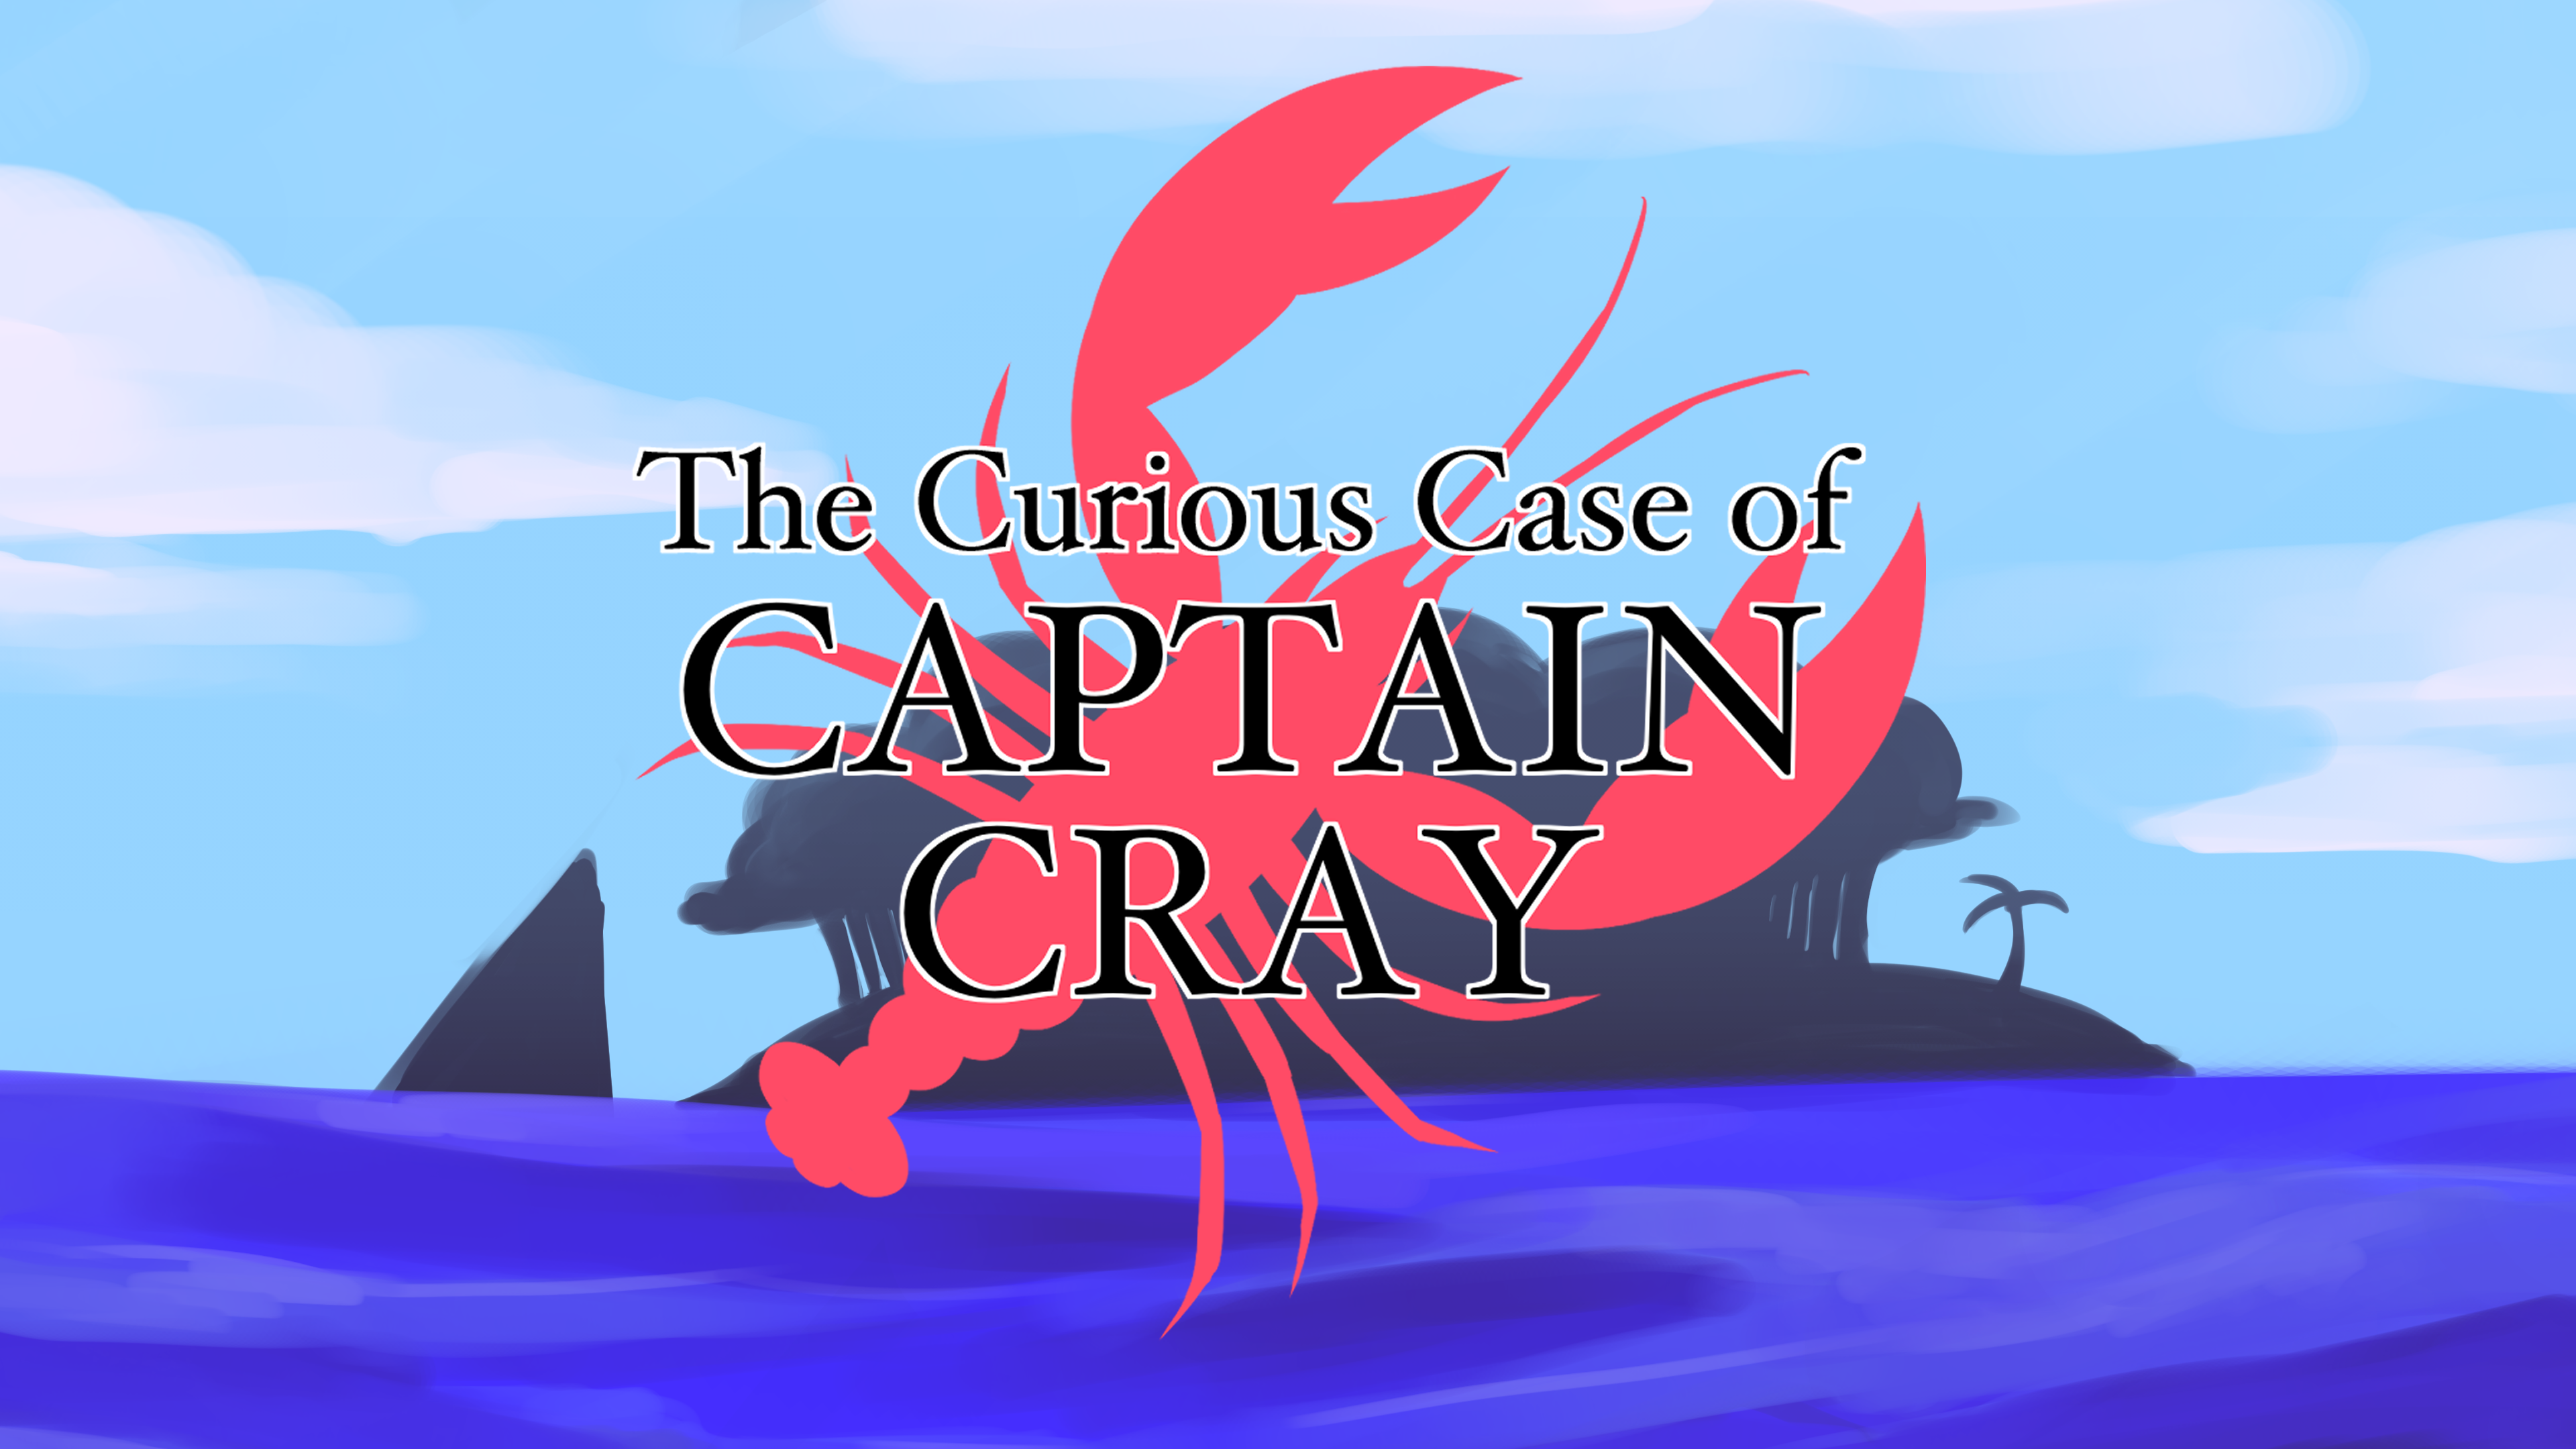 The Curious Case of Captain Cray